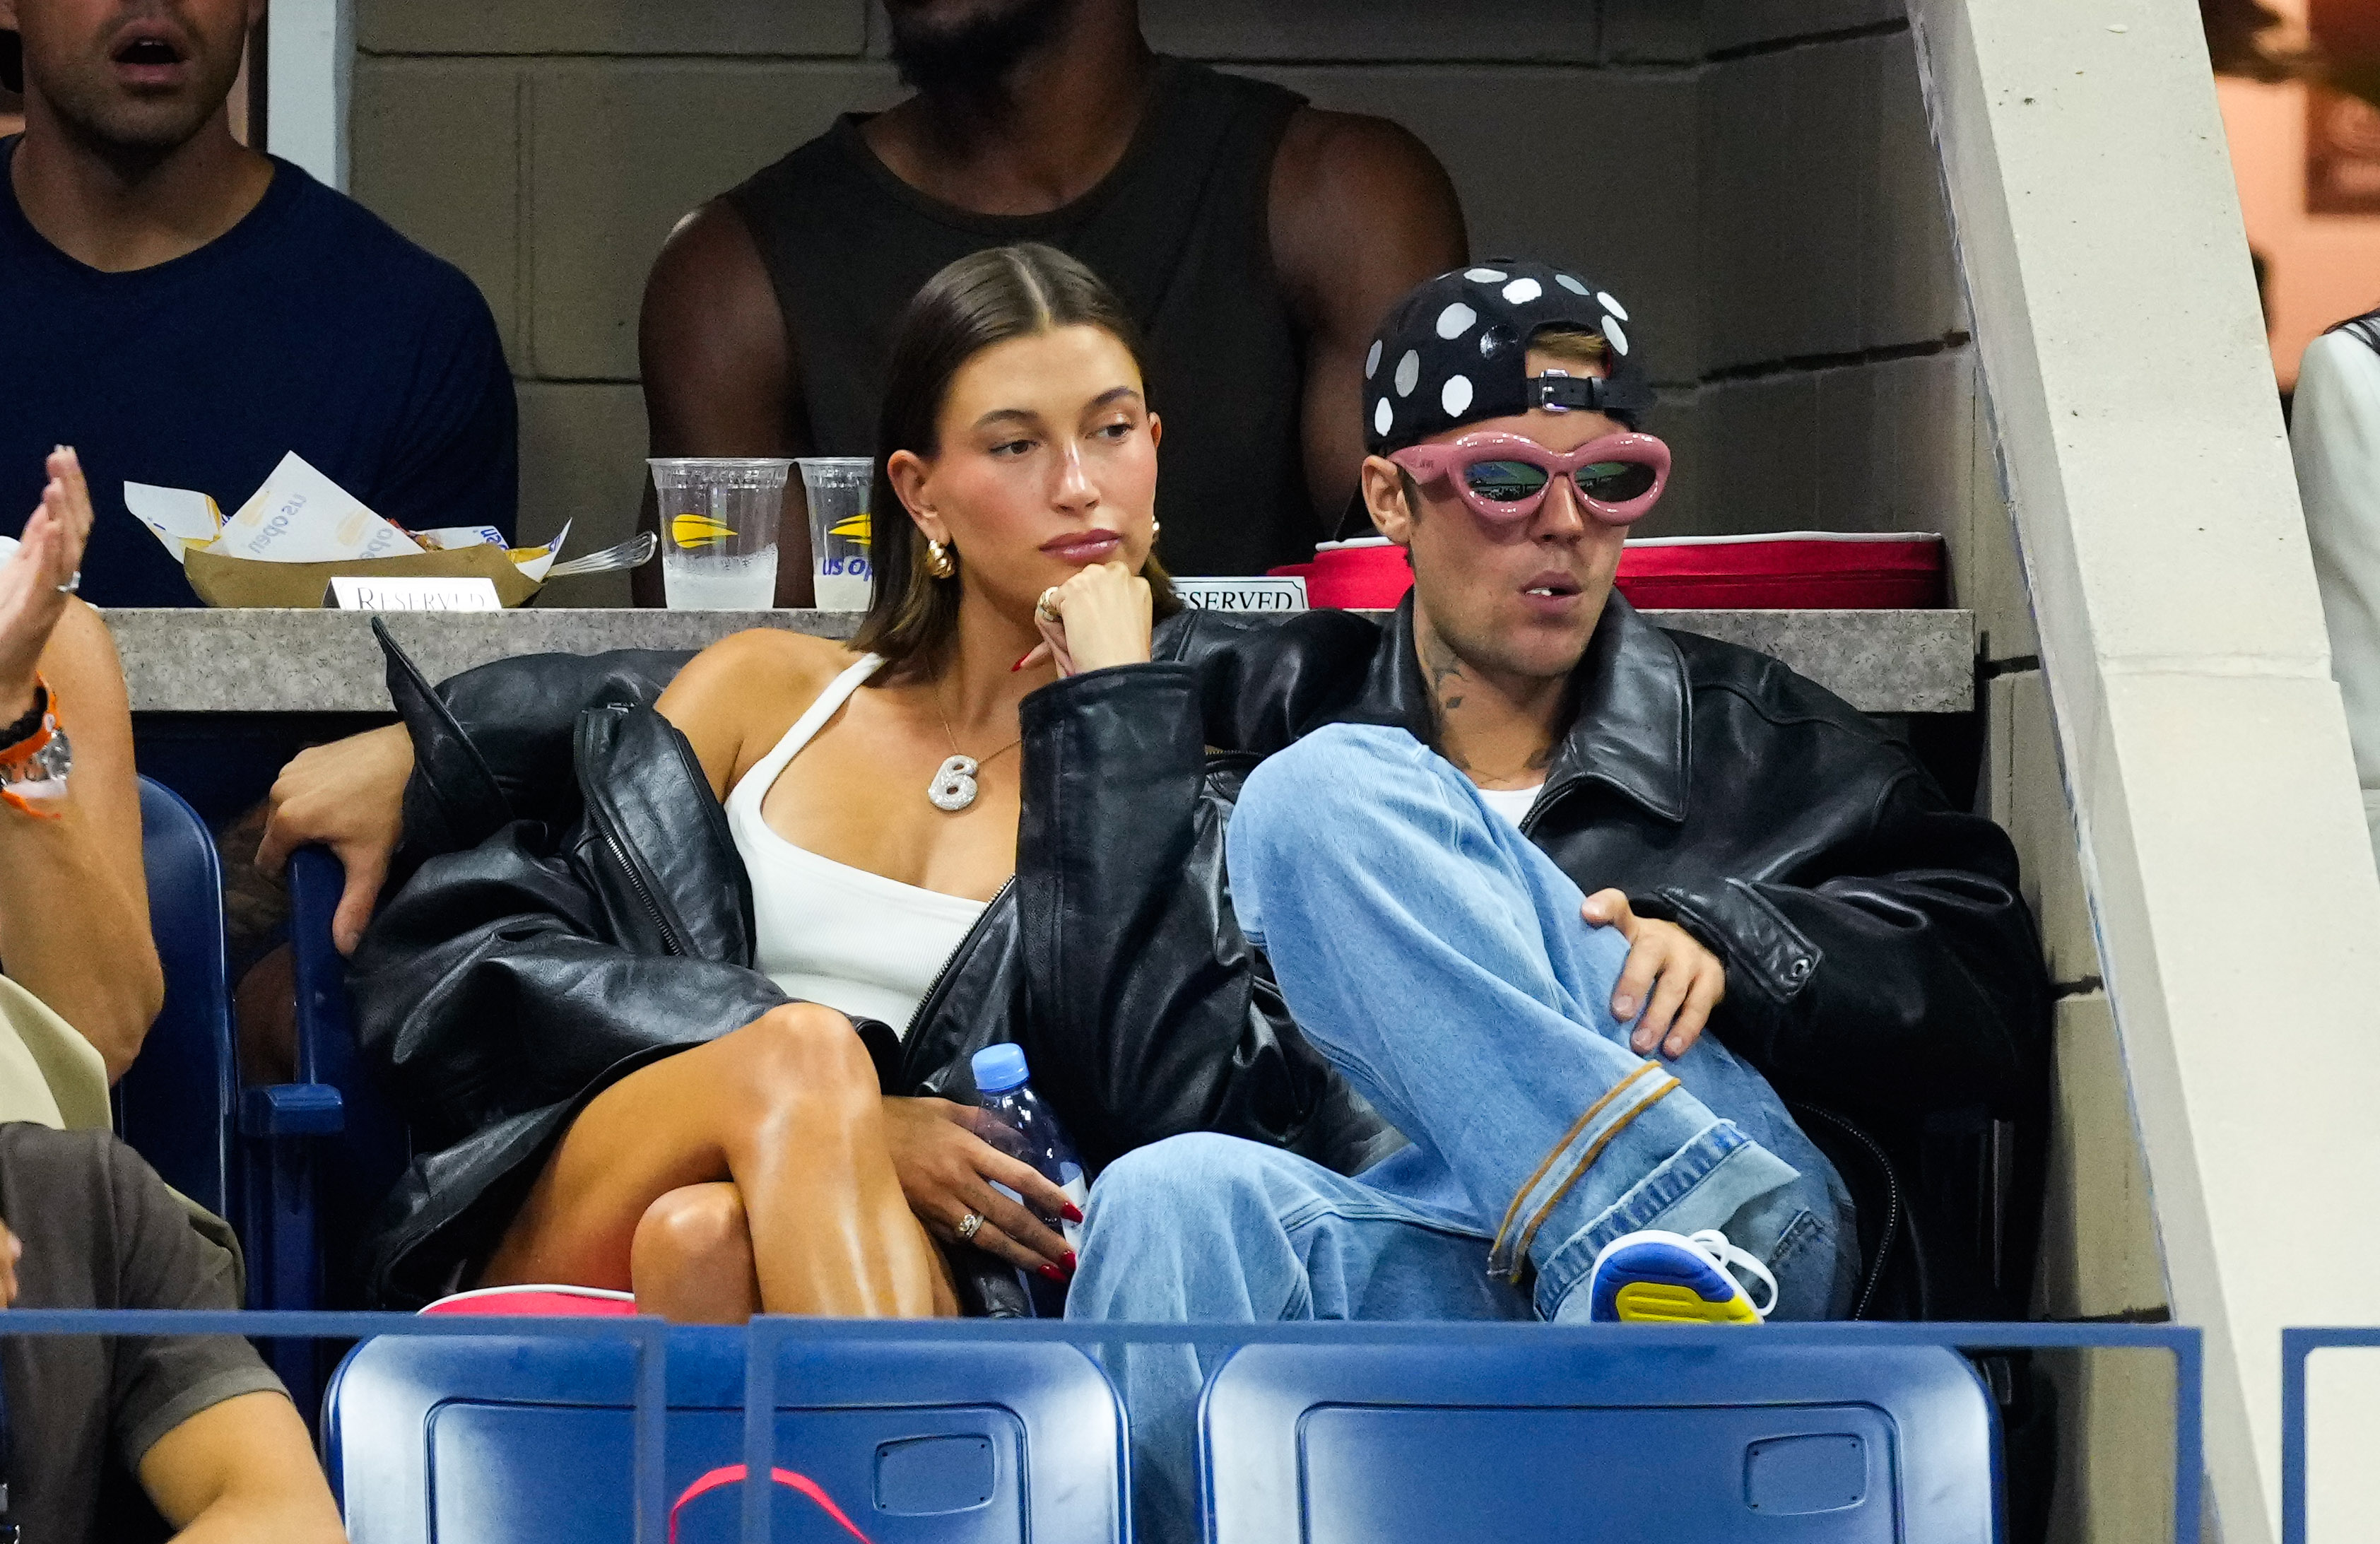 Fans speculate there could be trouble in his marriage to Hailey